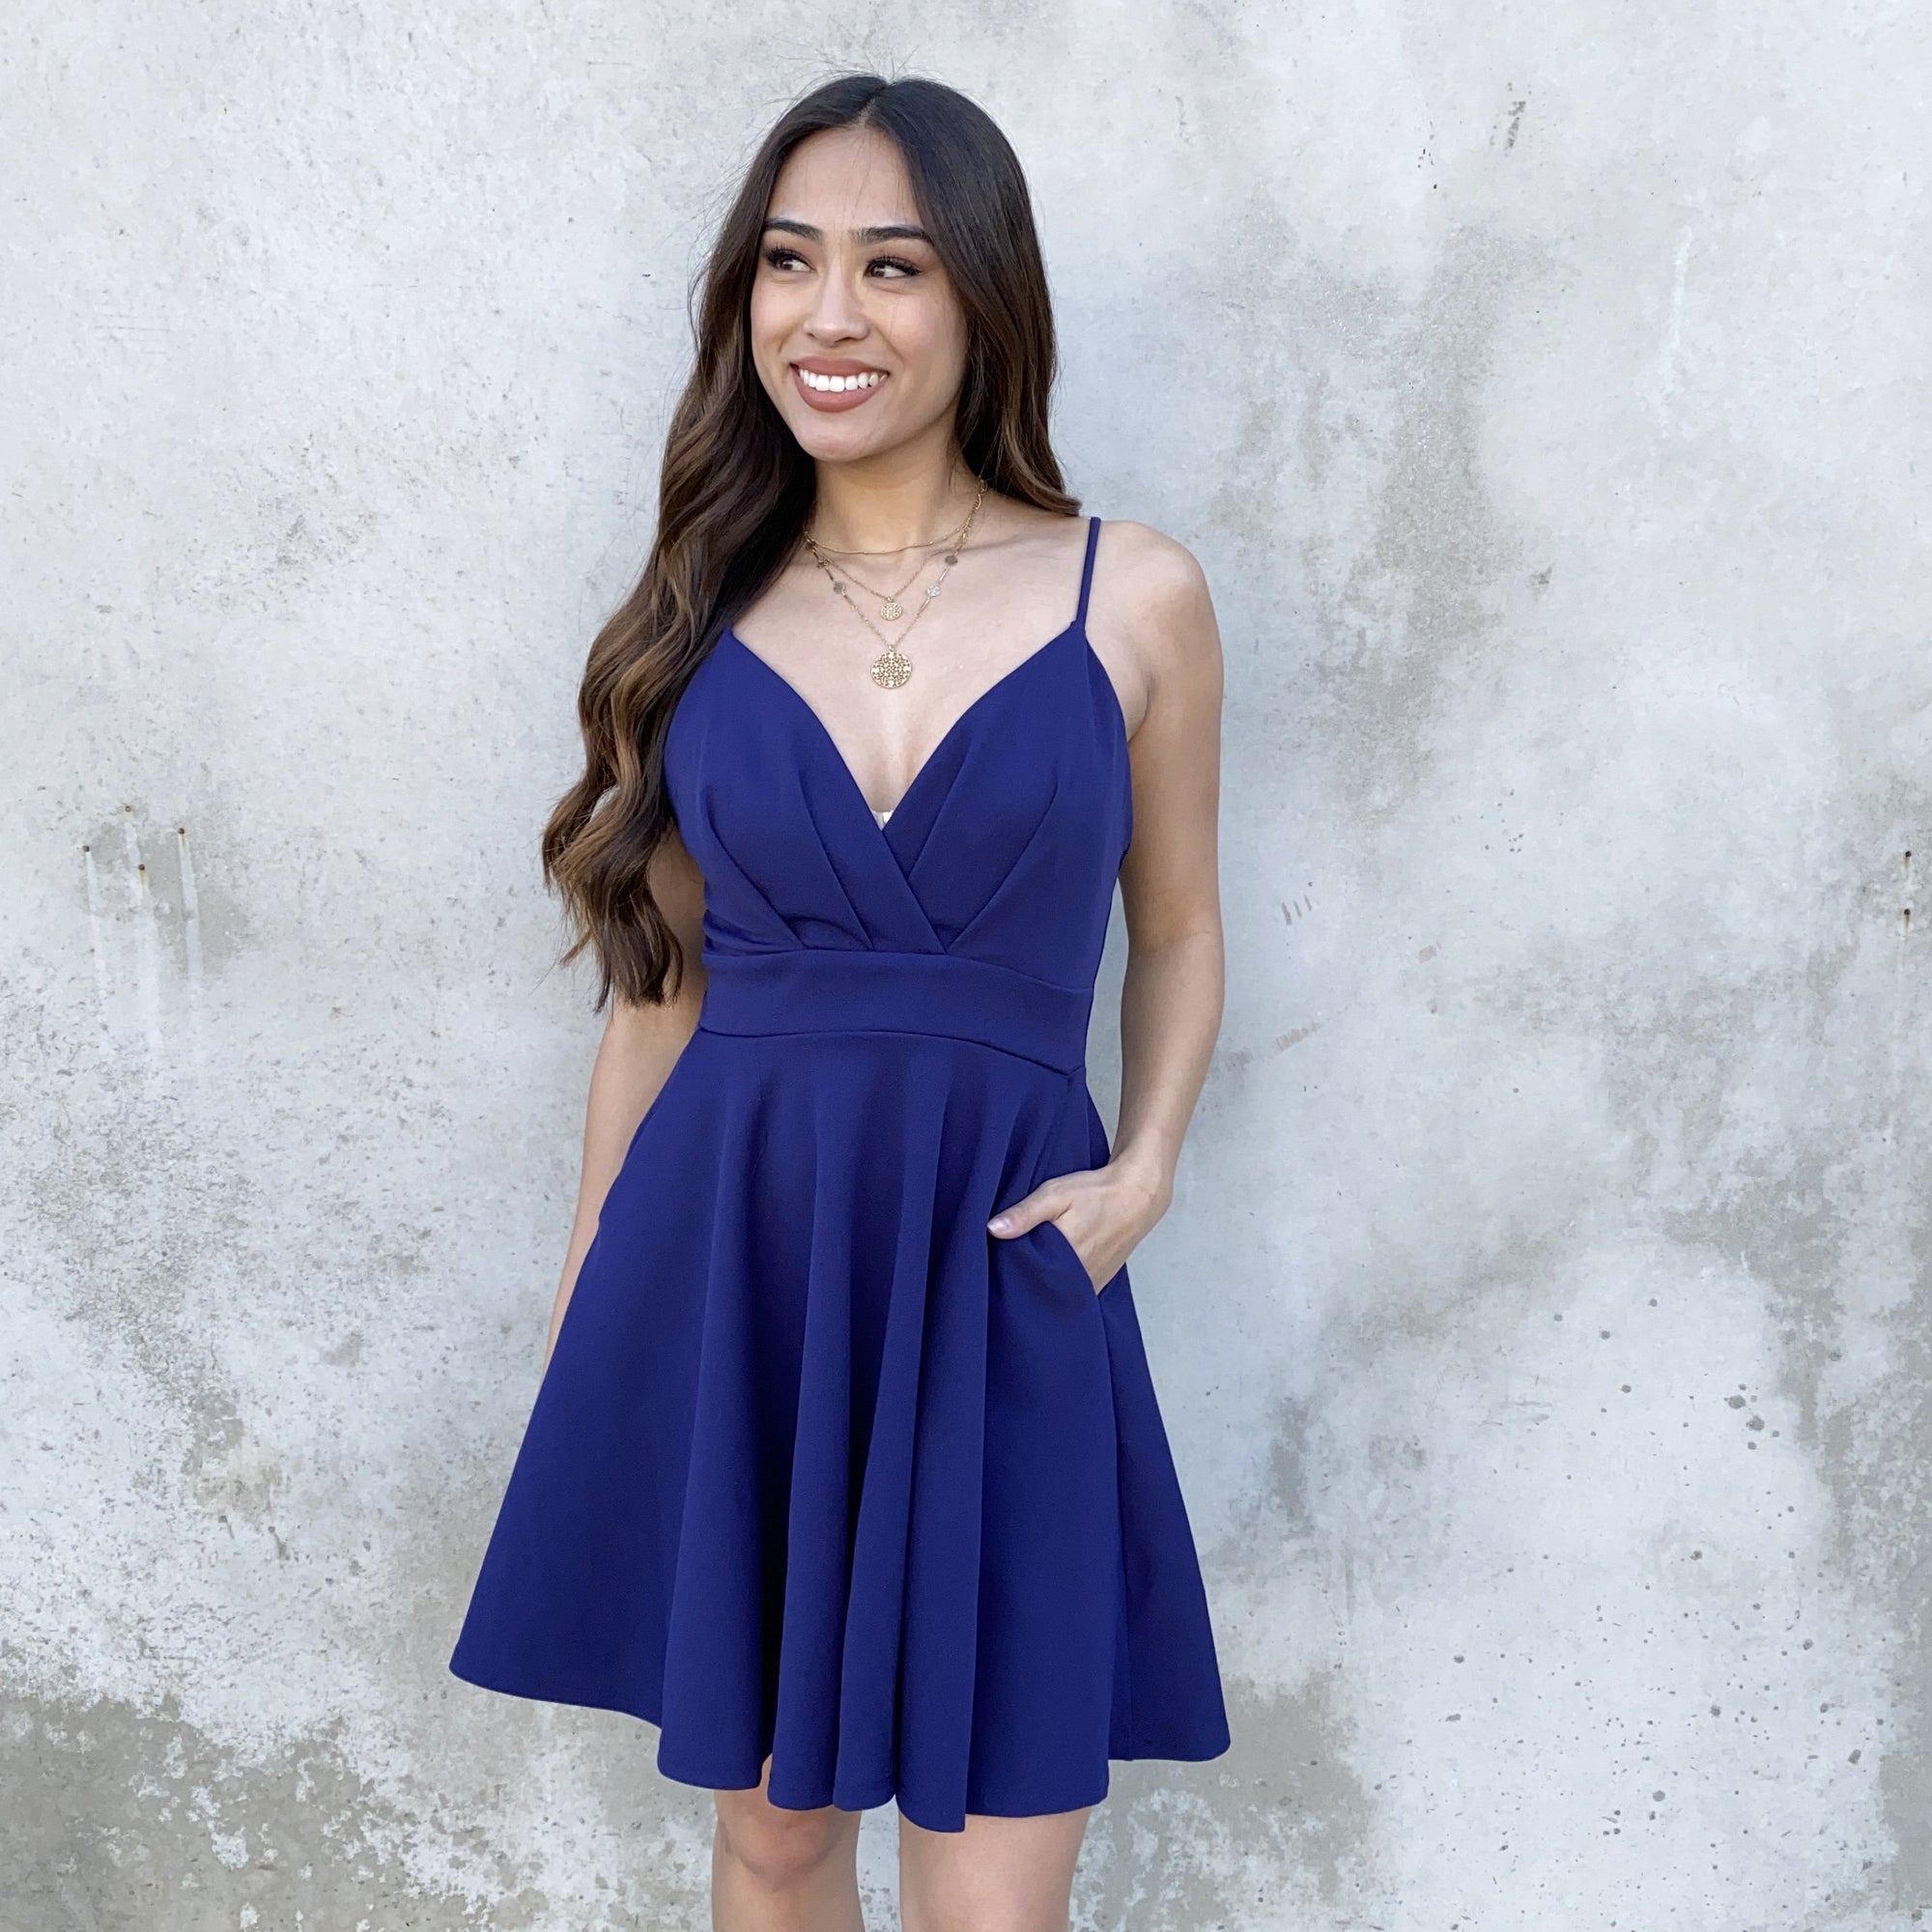 Swing In & Out Of Love Navy Skater Dress - Dainty Hooligan